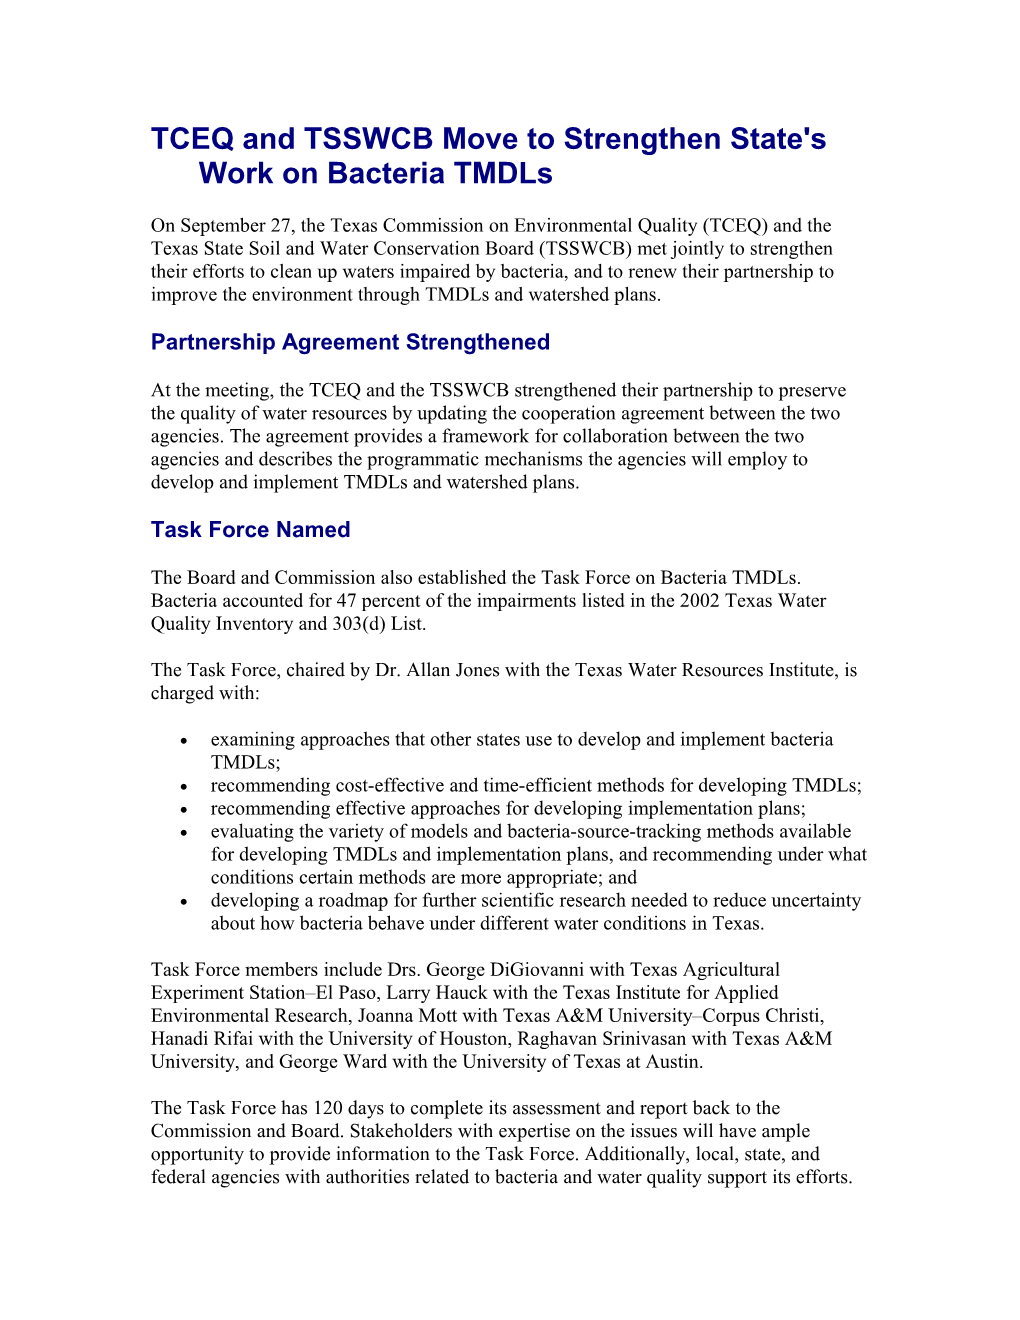 TCEQ and TSSWCB Move to Strengthen State's Work on Bacteria Tmdls